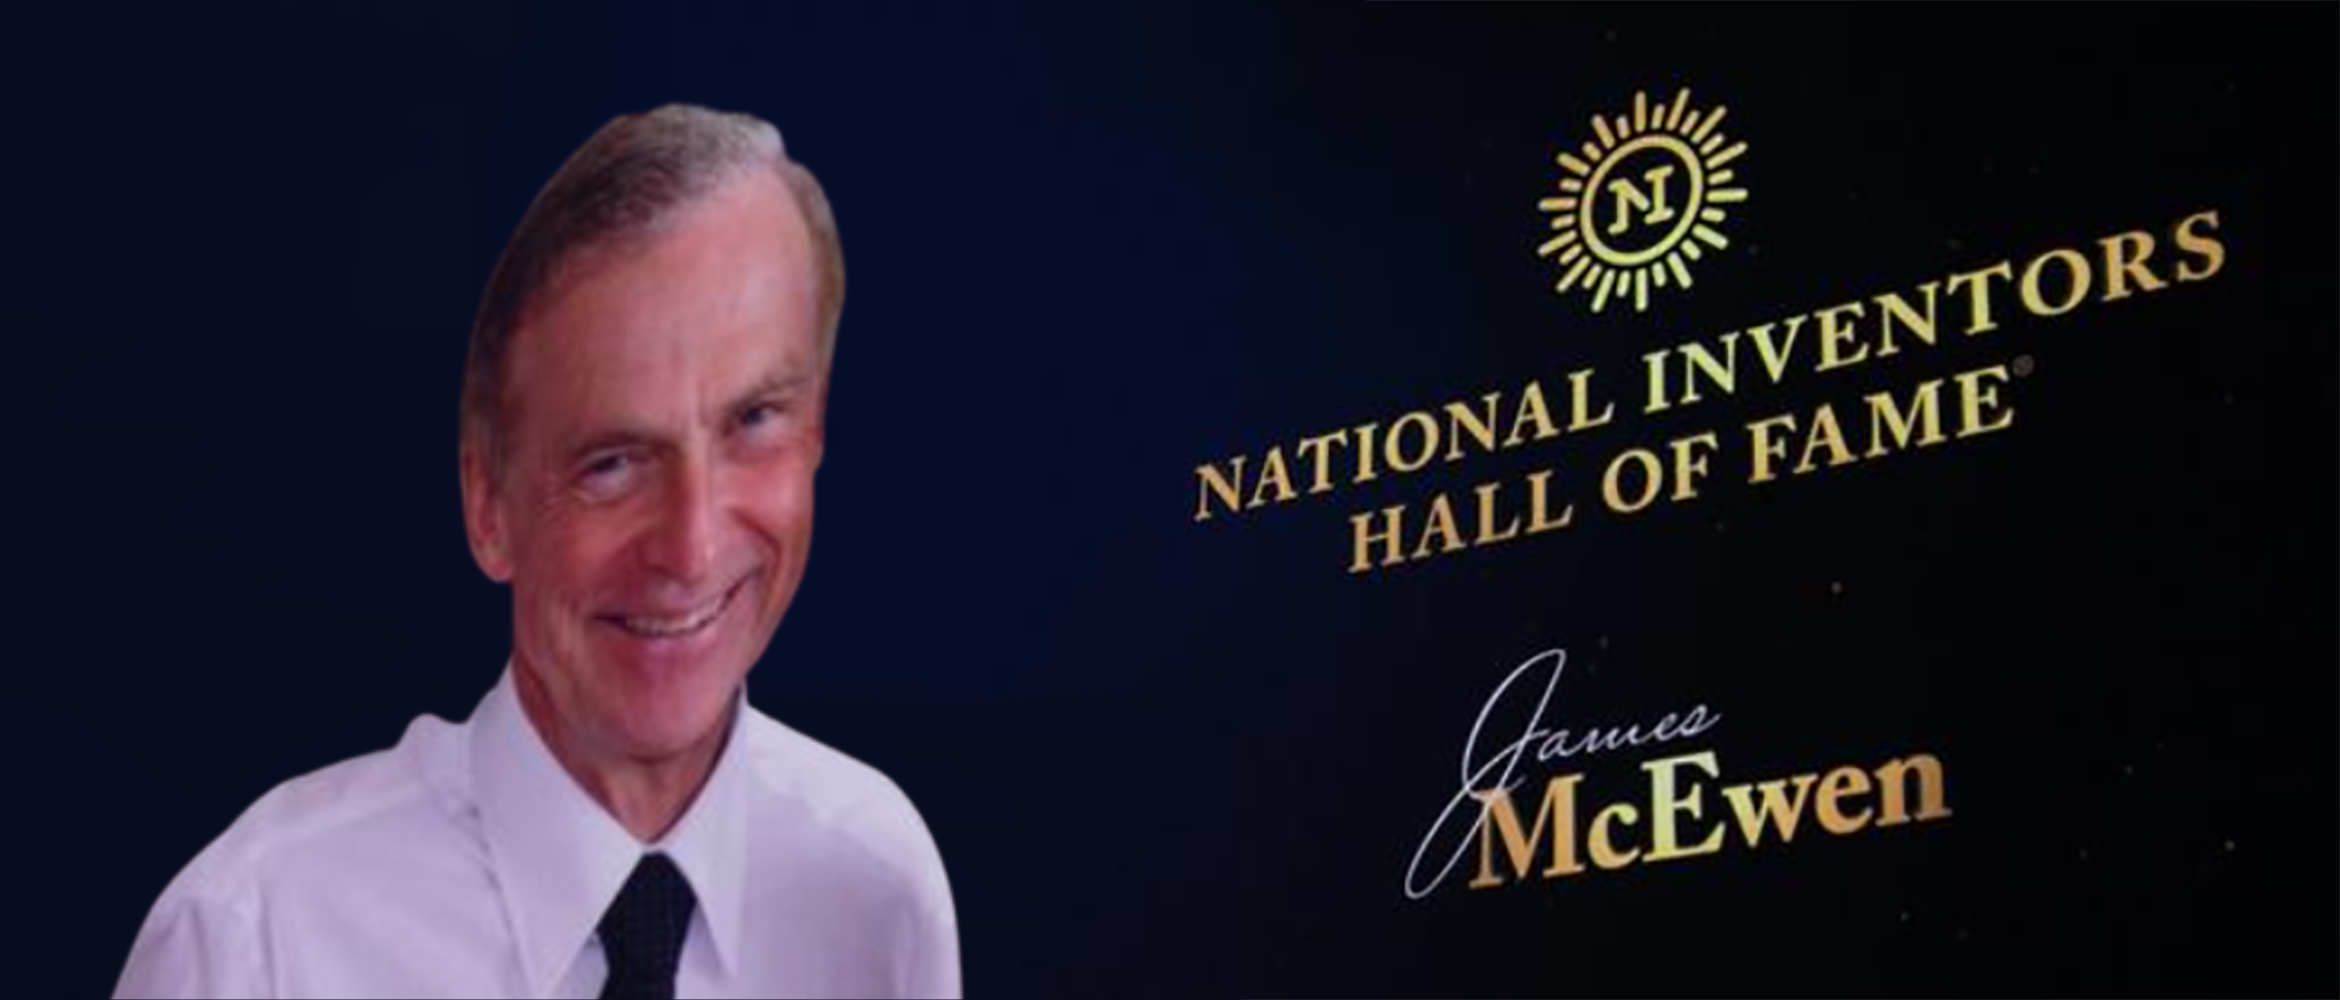 Dr. James McEwen Inducted into National Inventors Hall of Fame